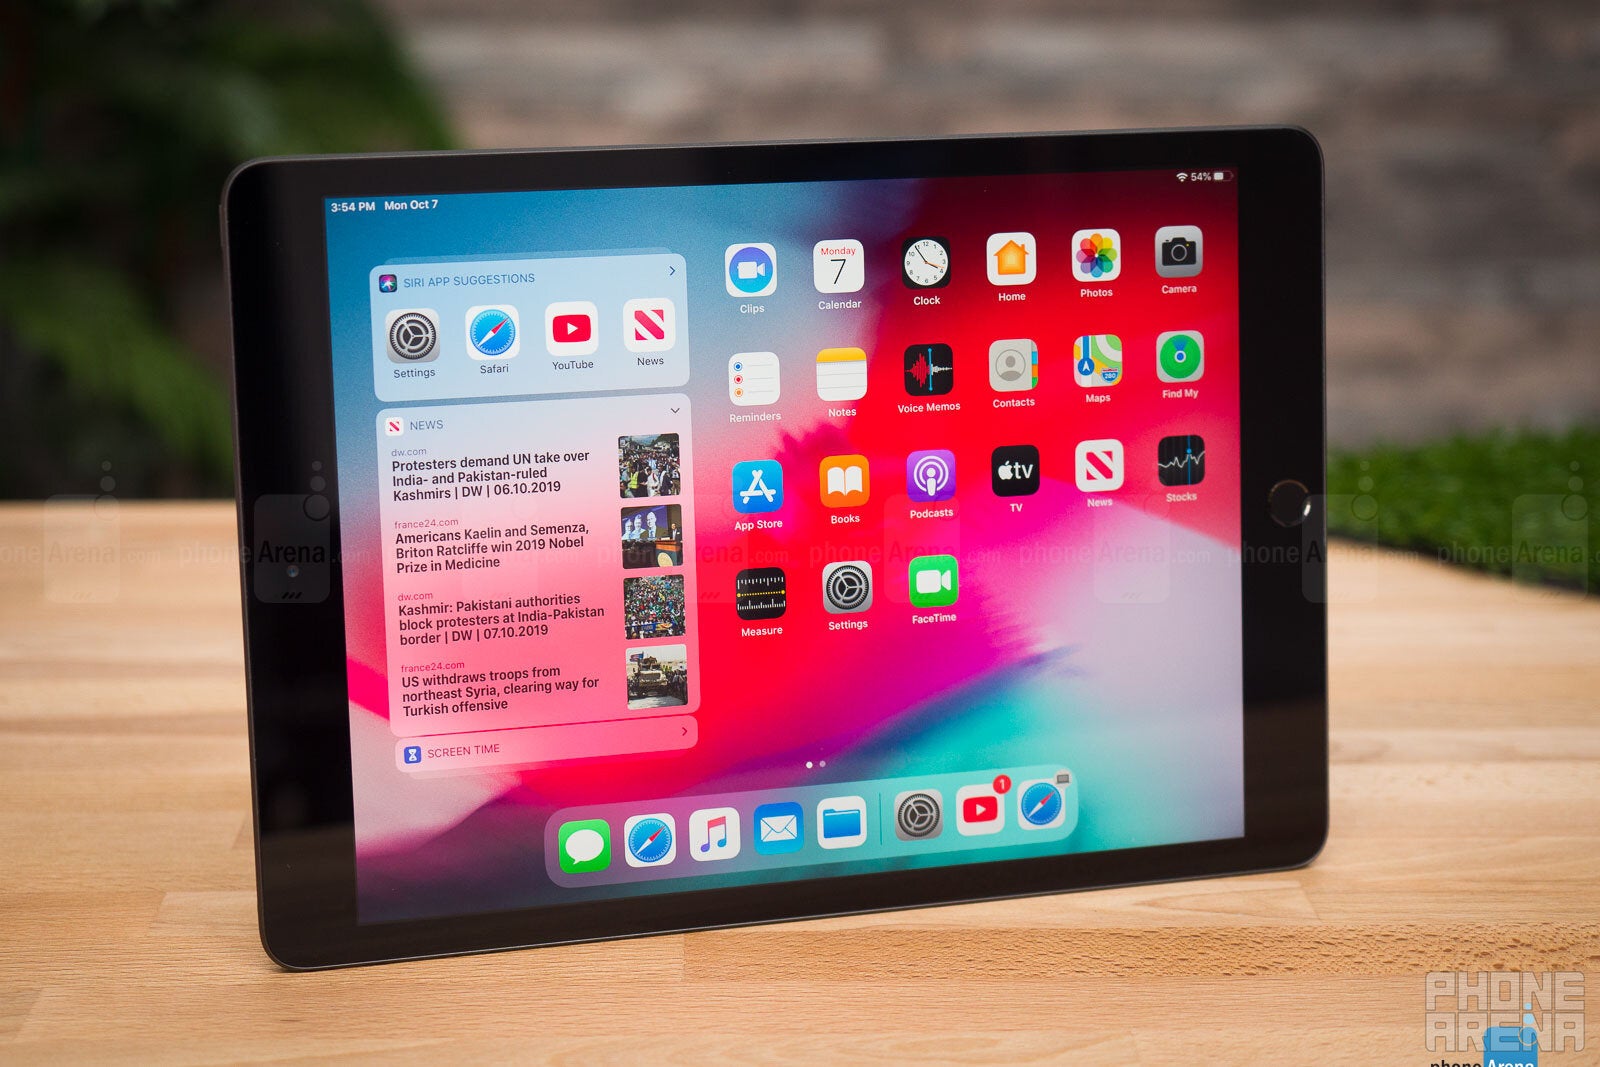 Apple iPad 7 (10.2) review: A cheap iPad worth buying